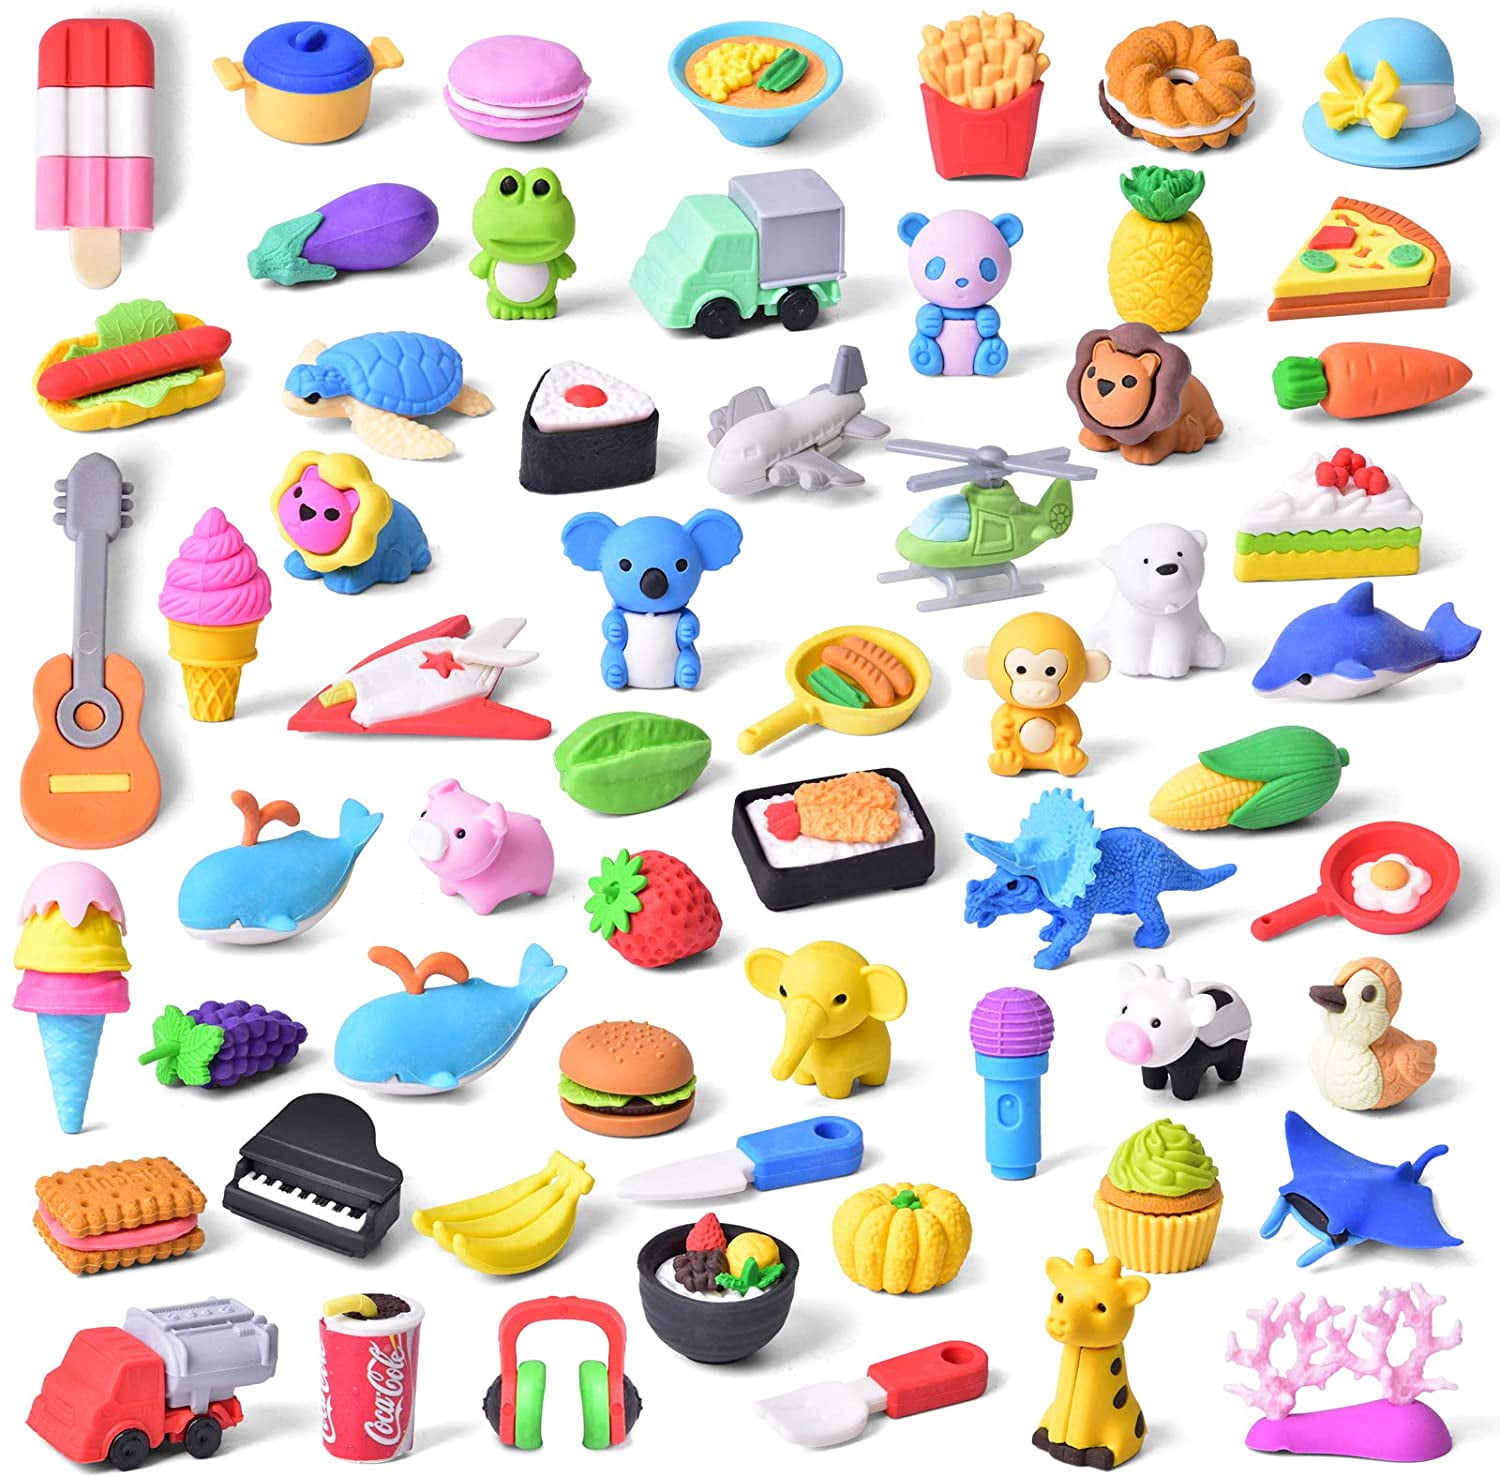 MINI ERASERS ASSORMENT  LOT 0F 144 CARNIVALS PARTY TOYS 1/2"  ASSORTED COLORS 